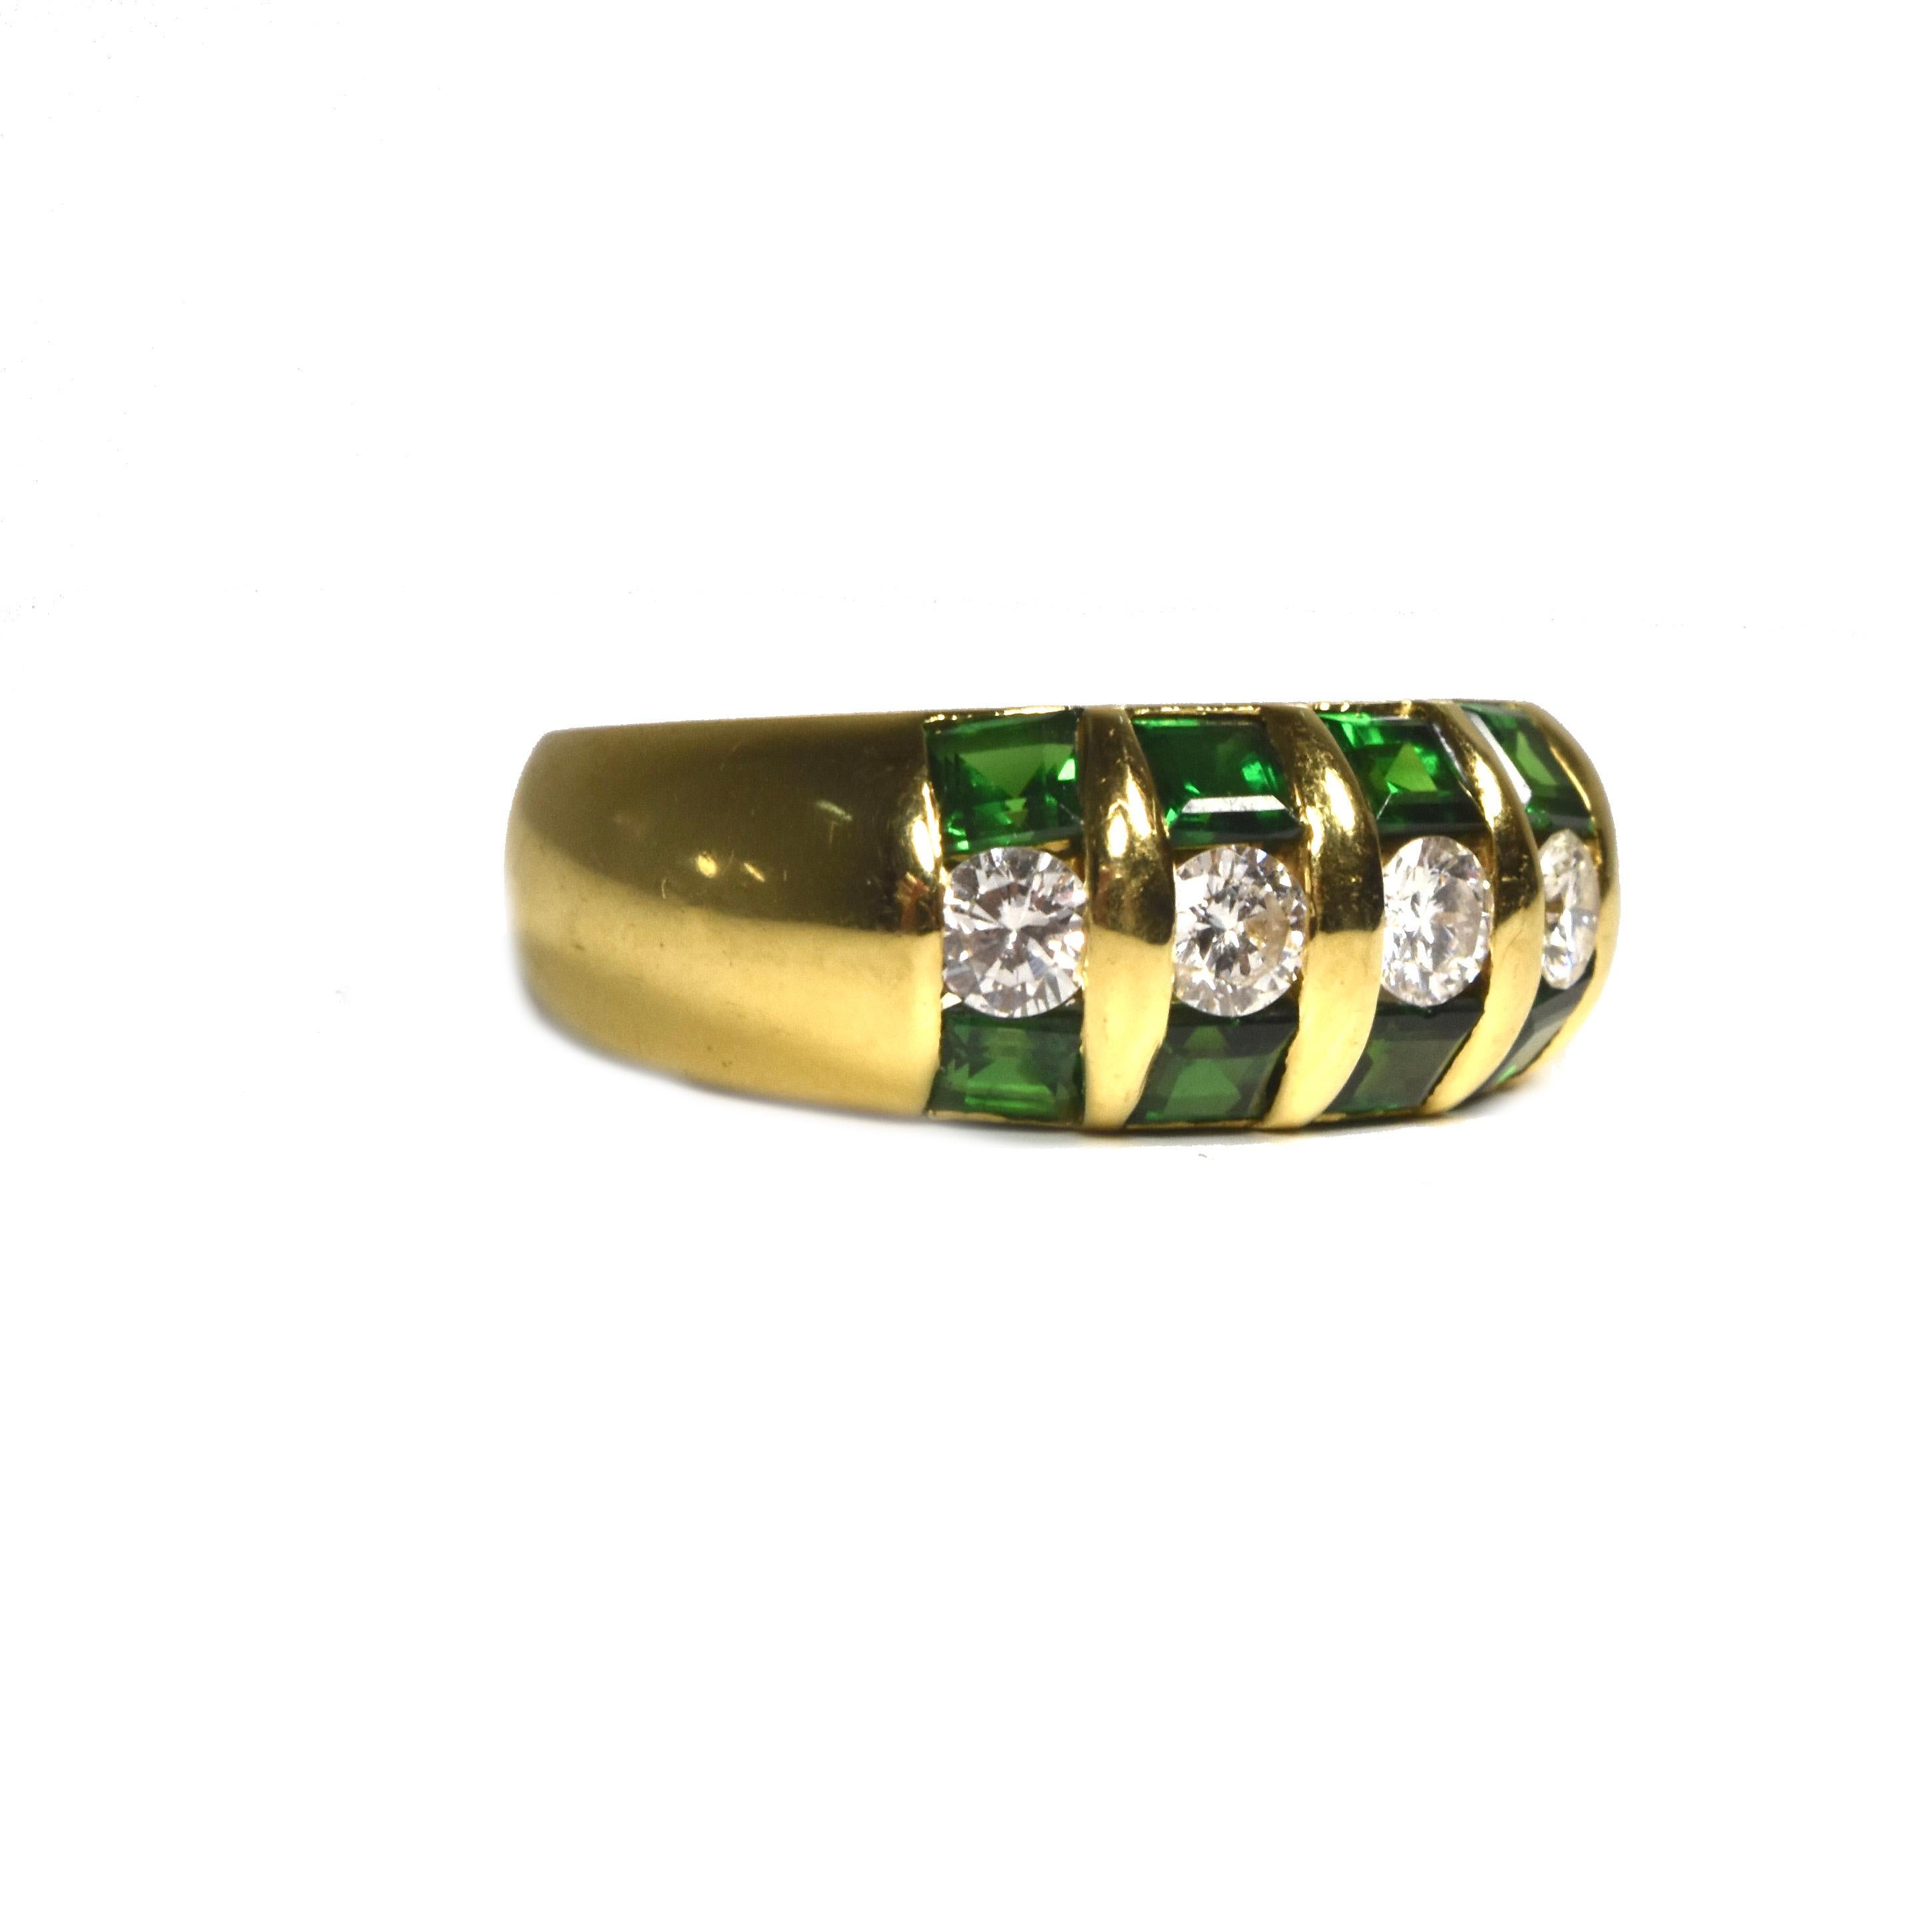 This very beautiful band ring features approx. 1 tcw (total carat weight) of dazzling diamonds surrounded by 8 square cut gleaming emeralds. The emeralds’ hue is a very deep saturated green, not too dark nor too light, they enhance the fire of each